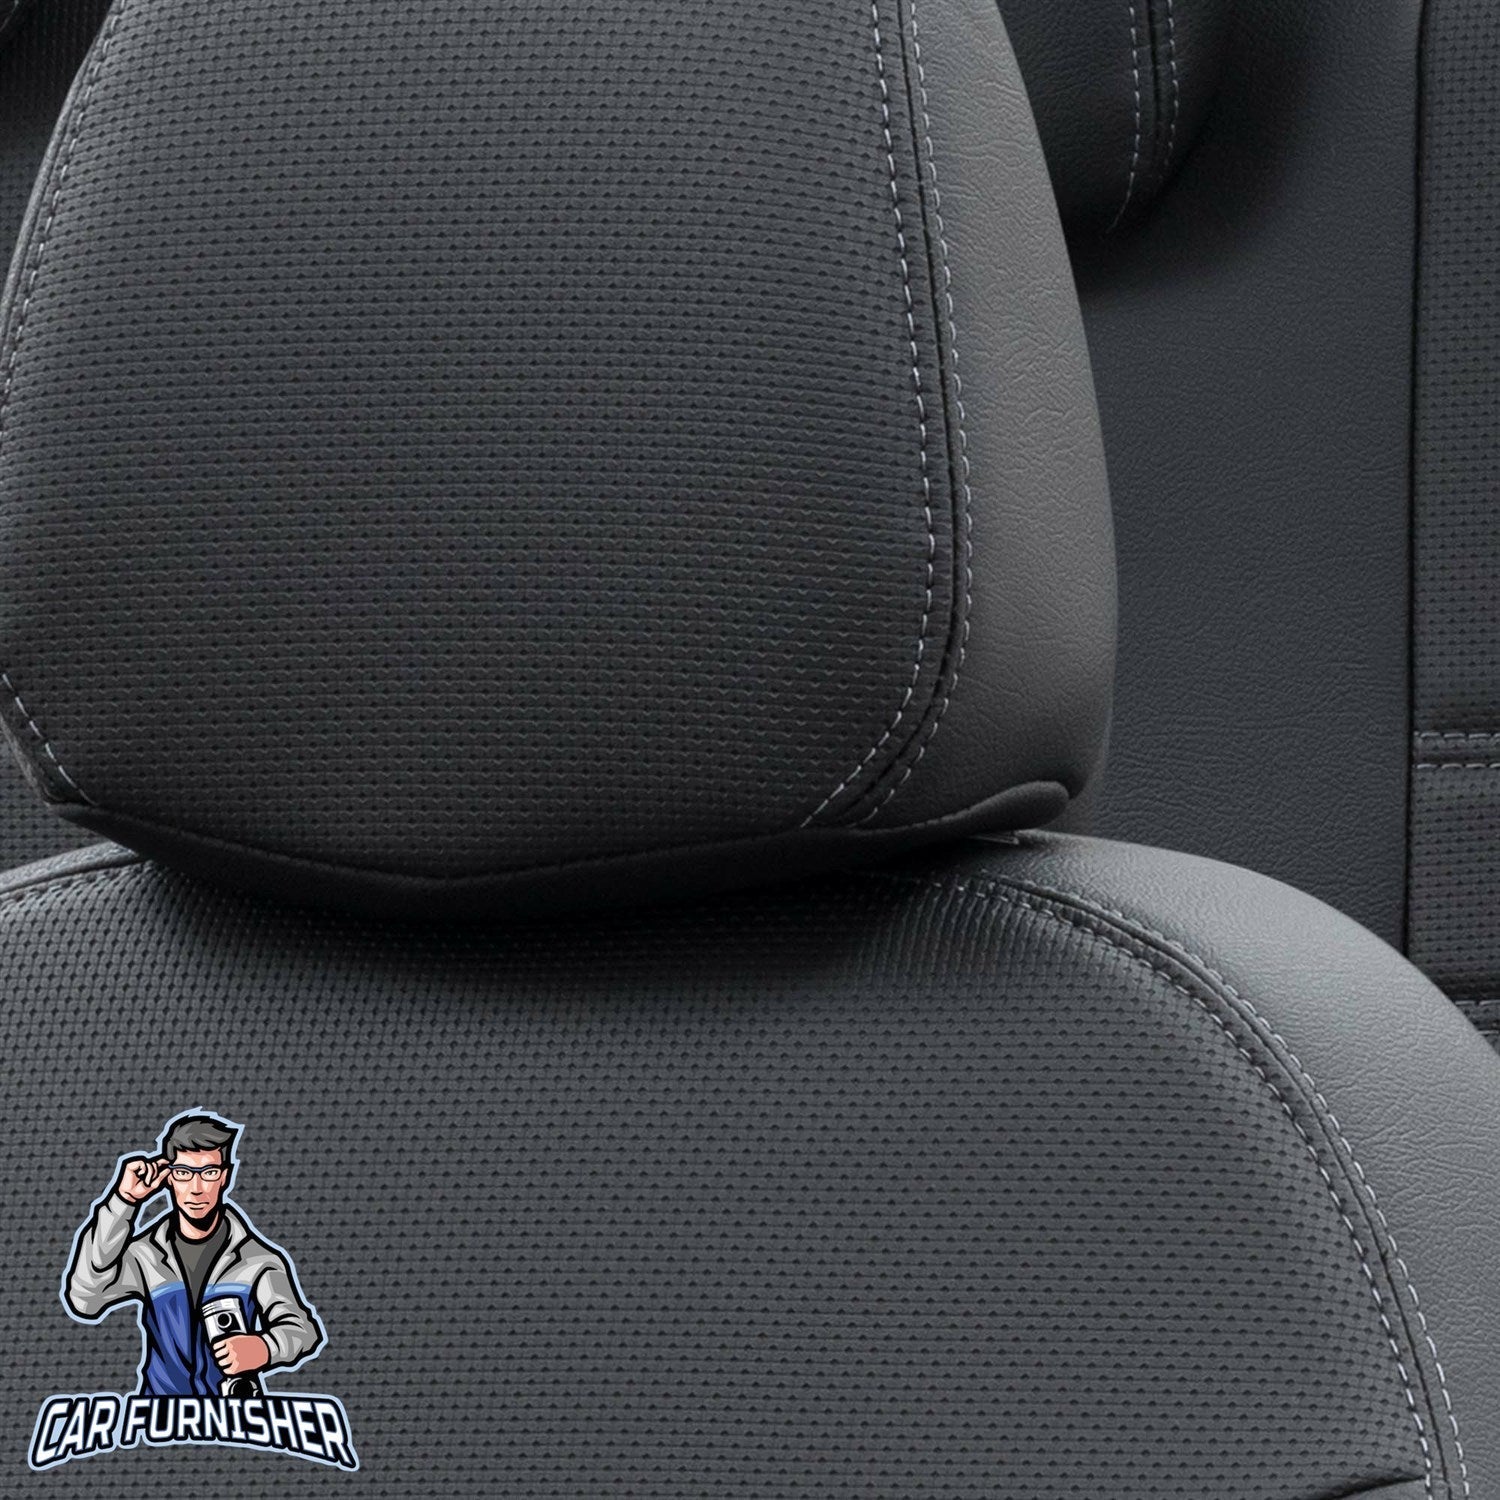 Fiat Scudo Seat Covers New York Leather Design Black Leather